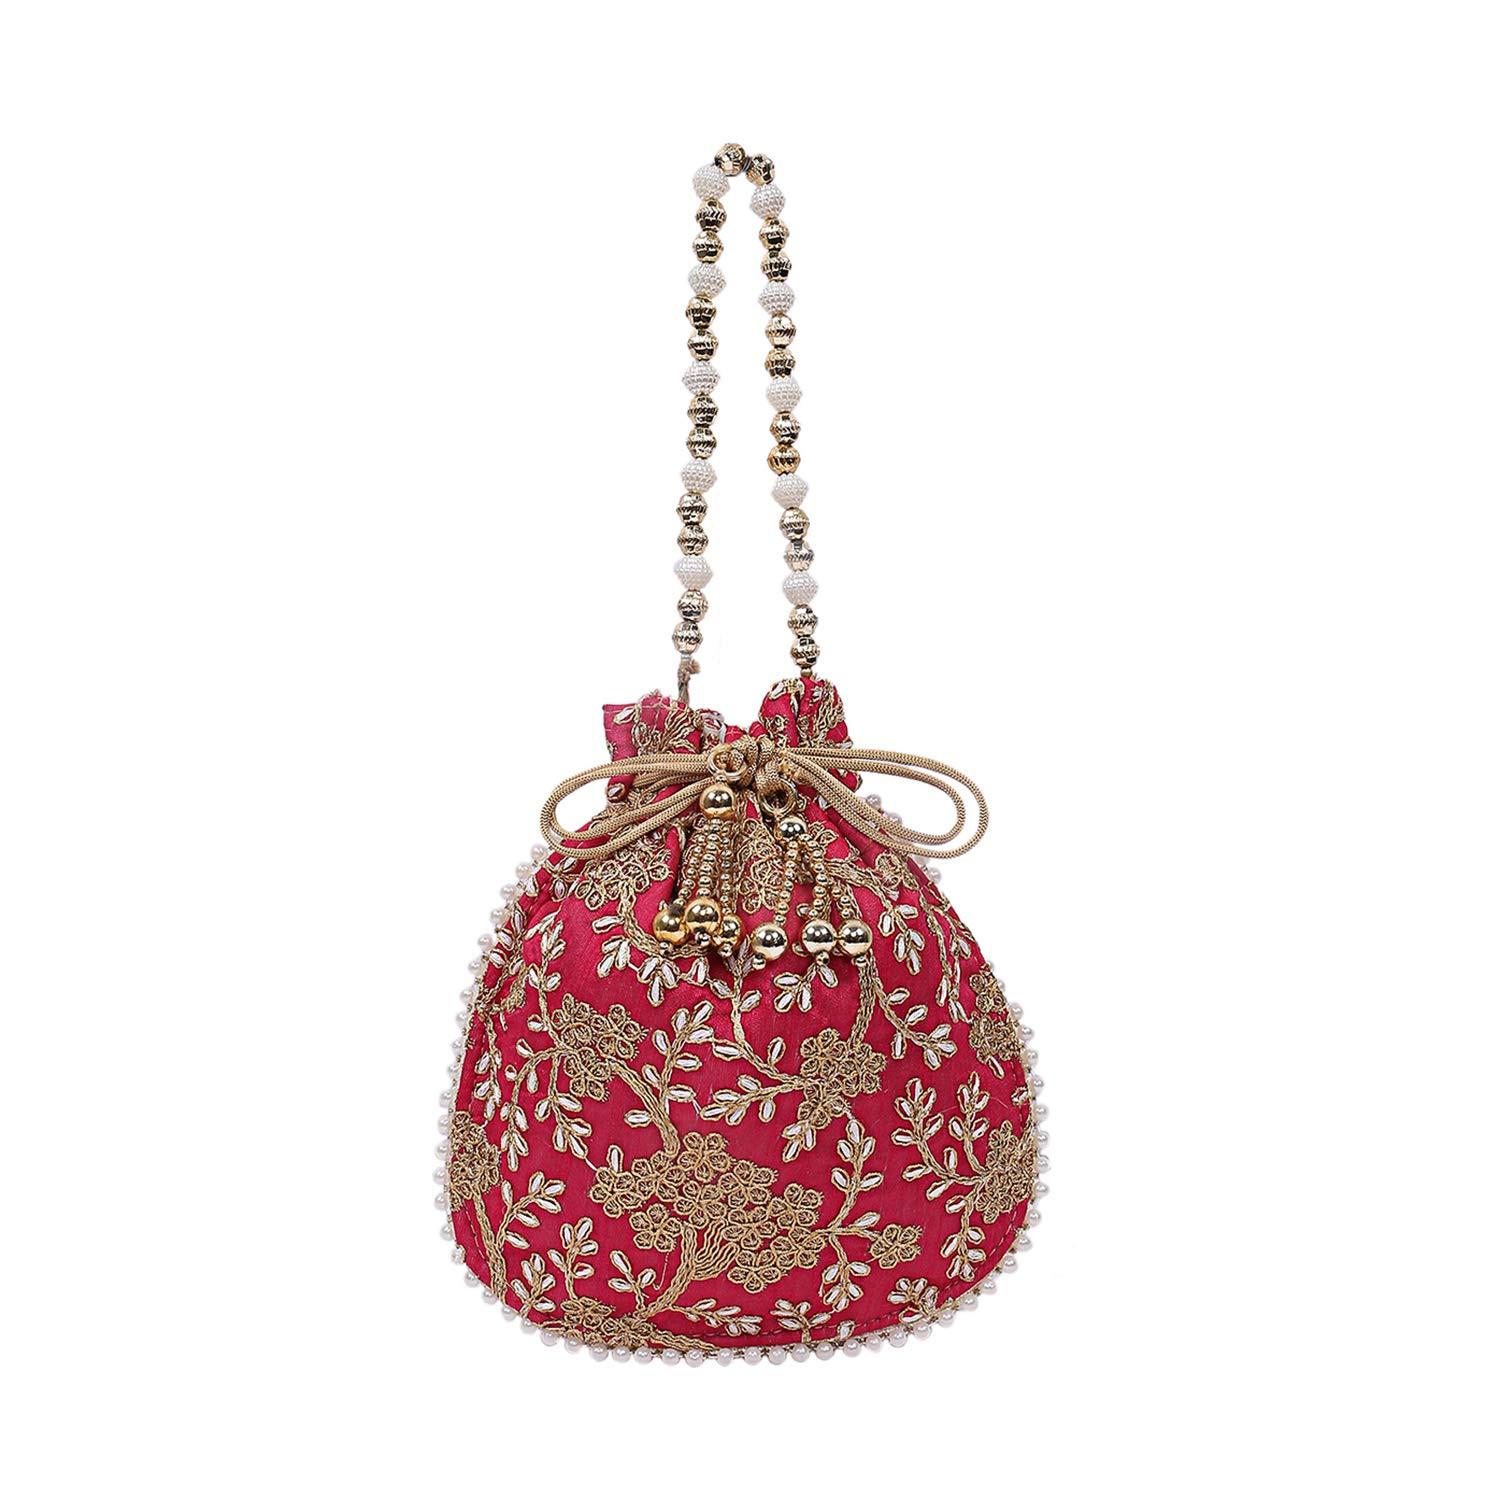 Kuber Industries Embroidery Drawstring Potli|Hand Purse With Gold Pearl Border & Handle For Woman,Girls (Red)